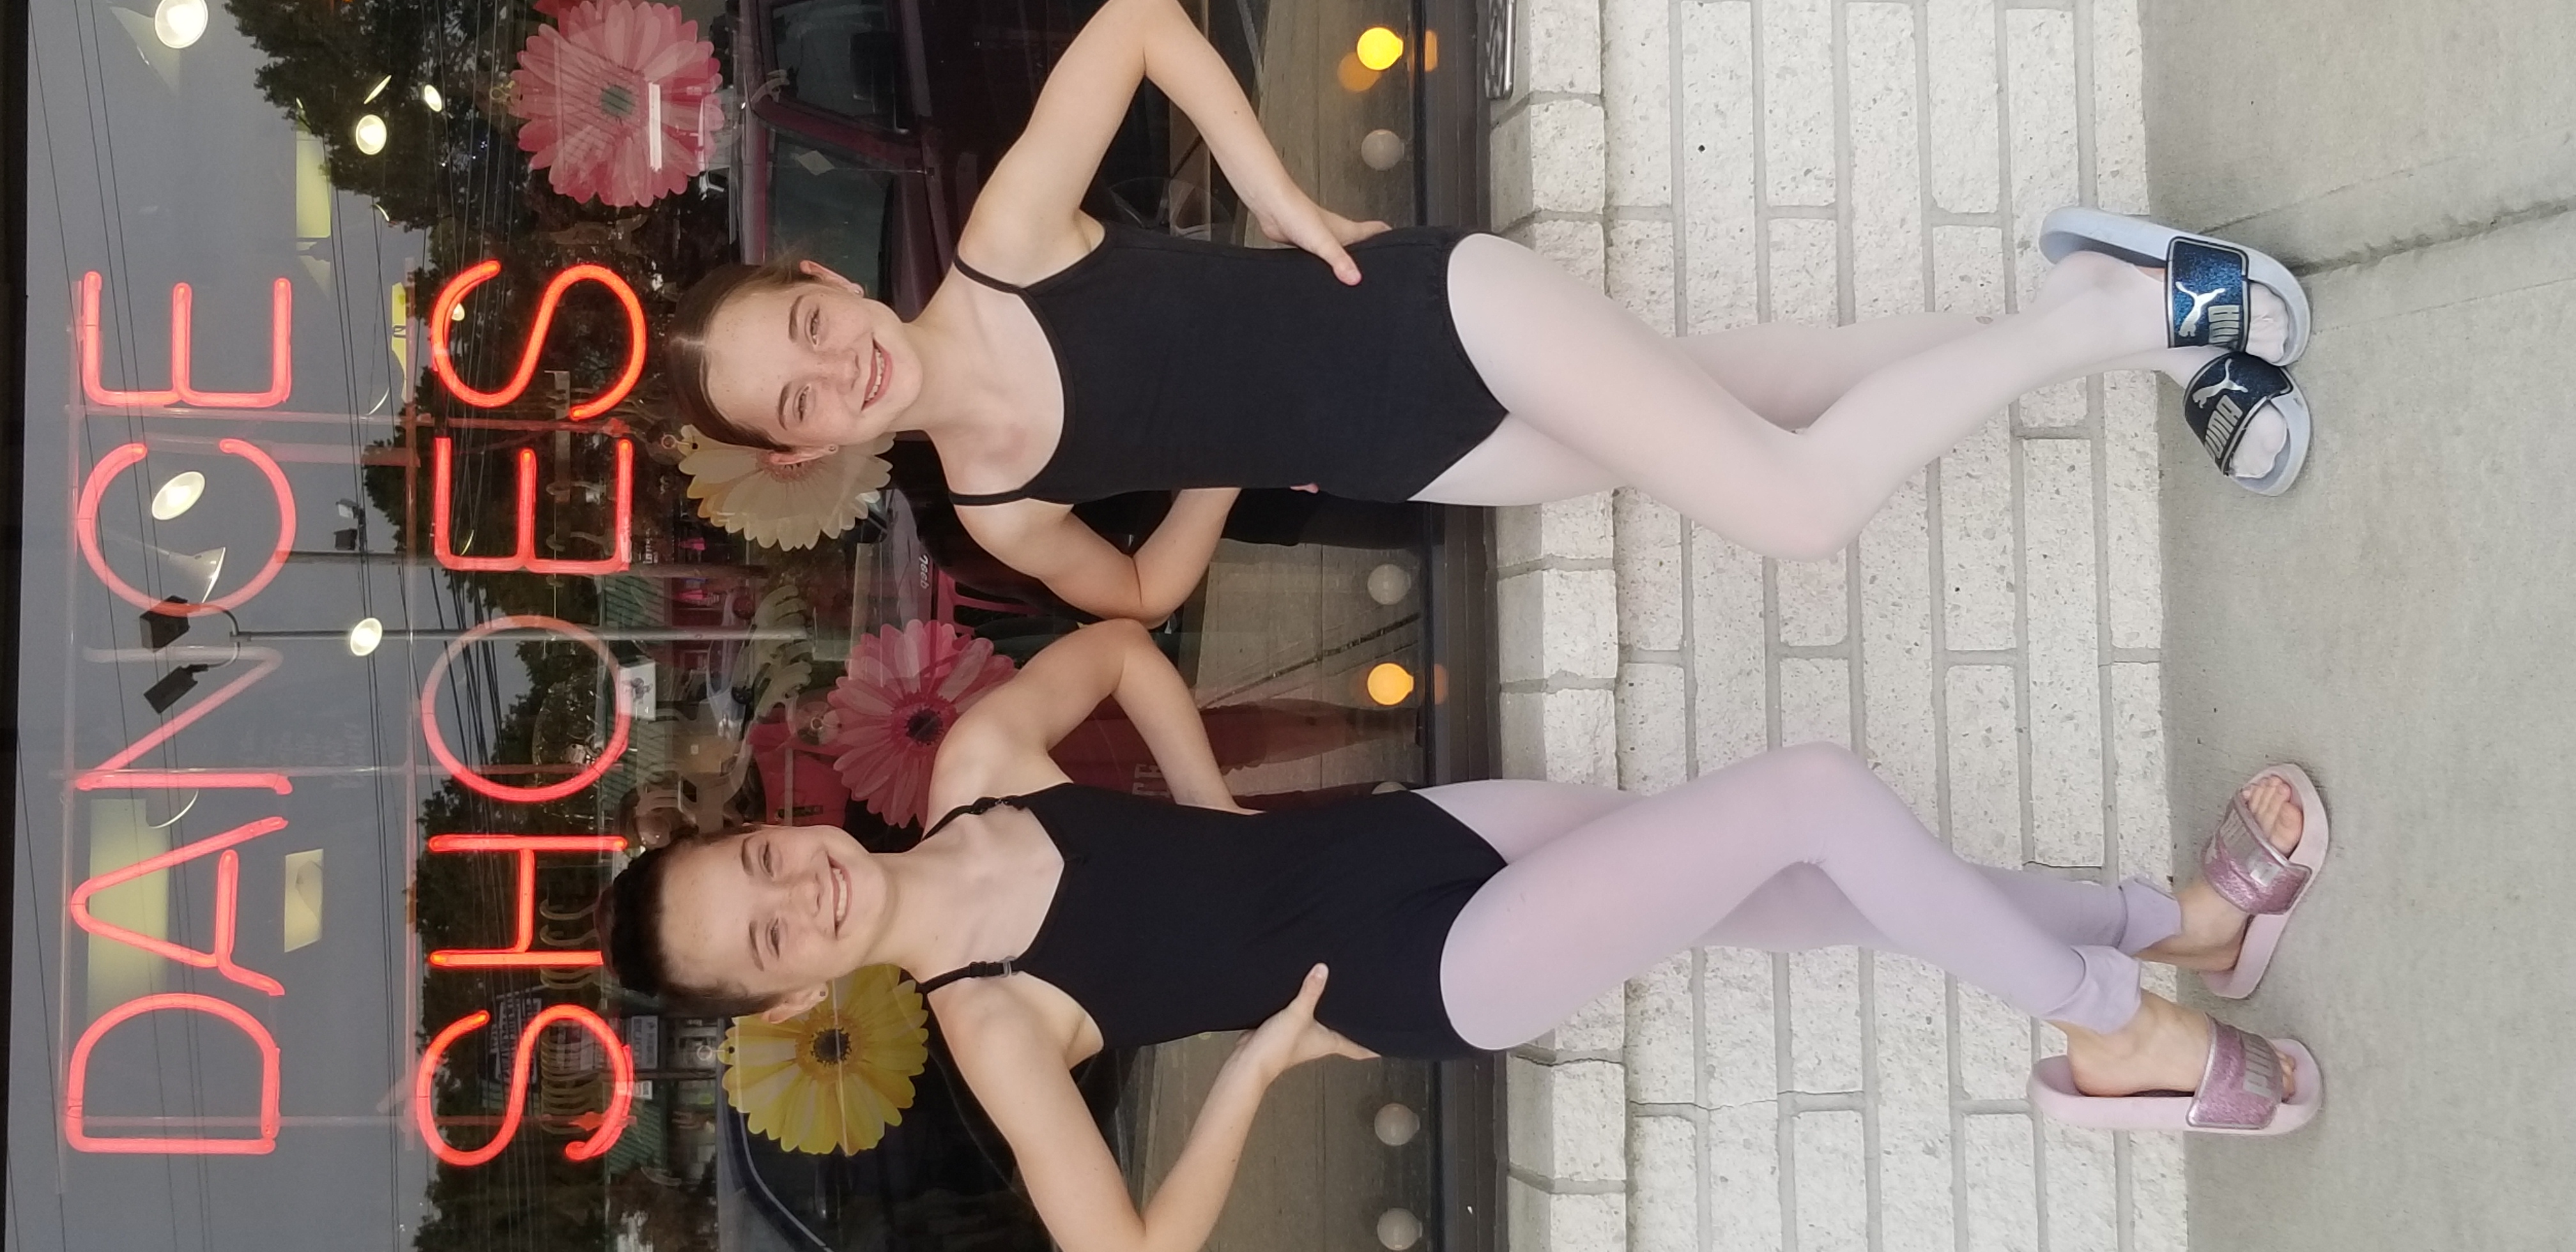 Girls in front of a dance supply store